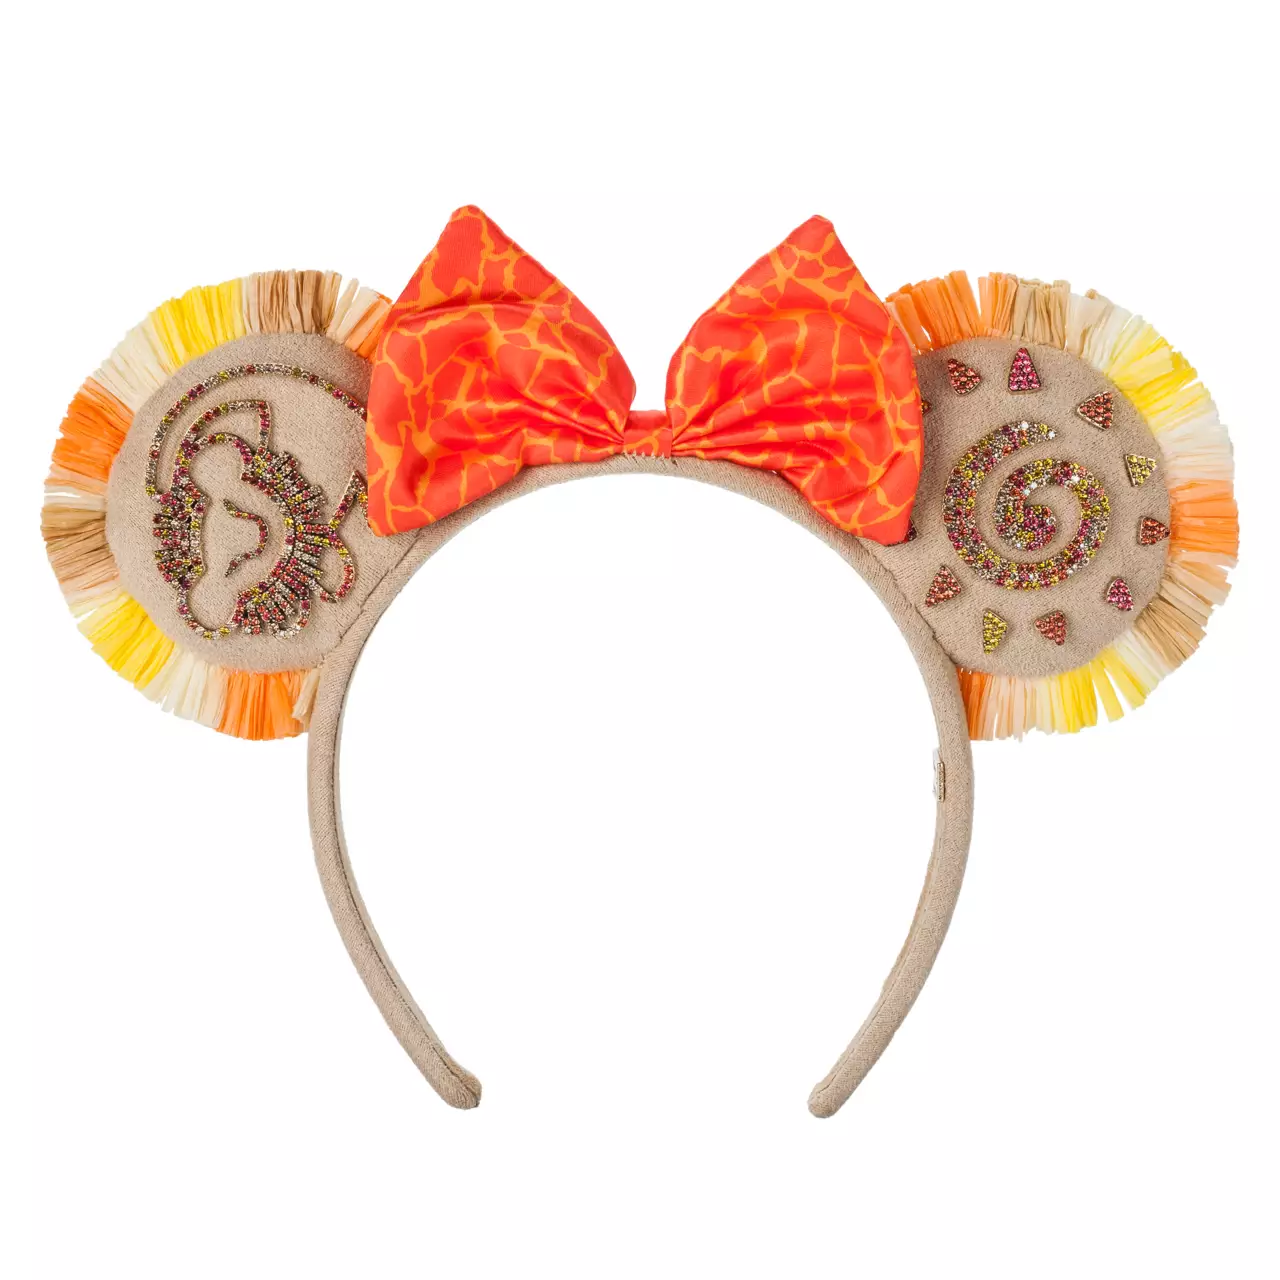 The Lion King Ears by BaubleBar